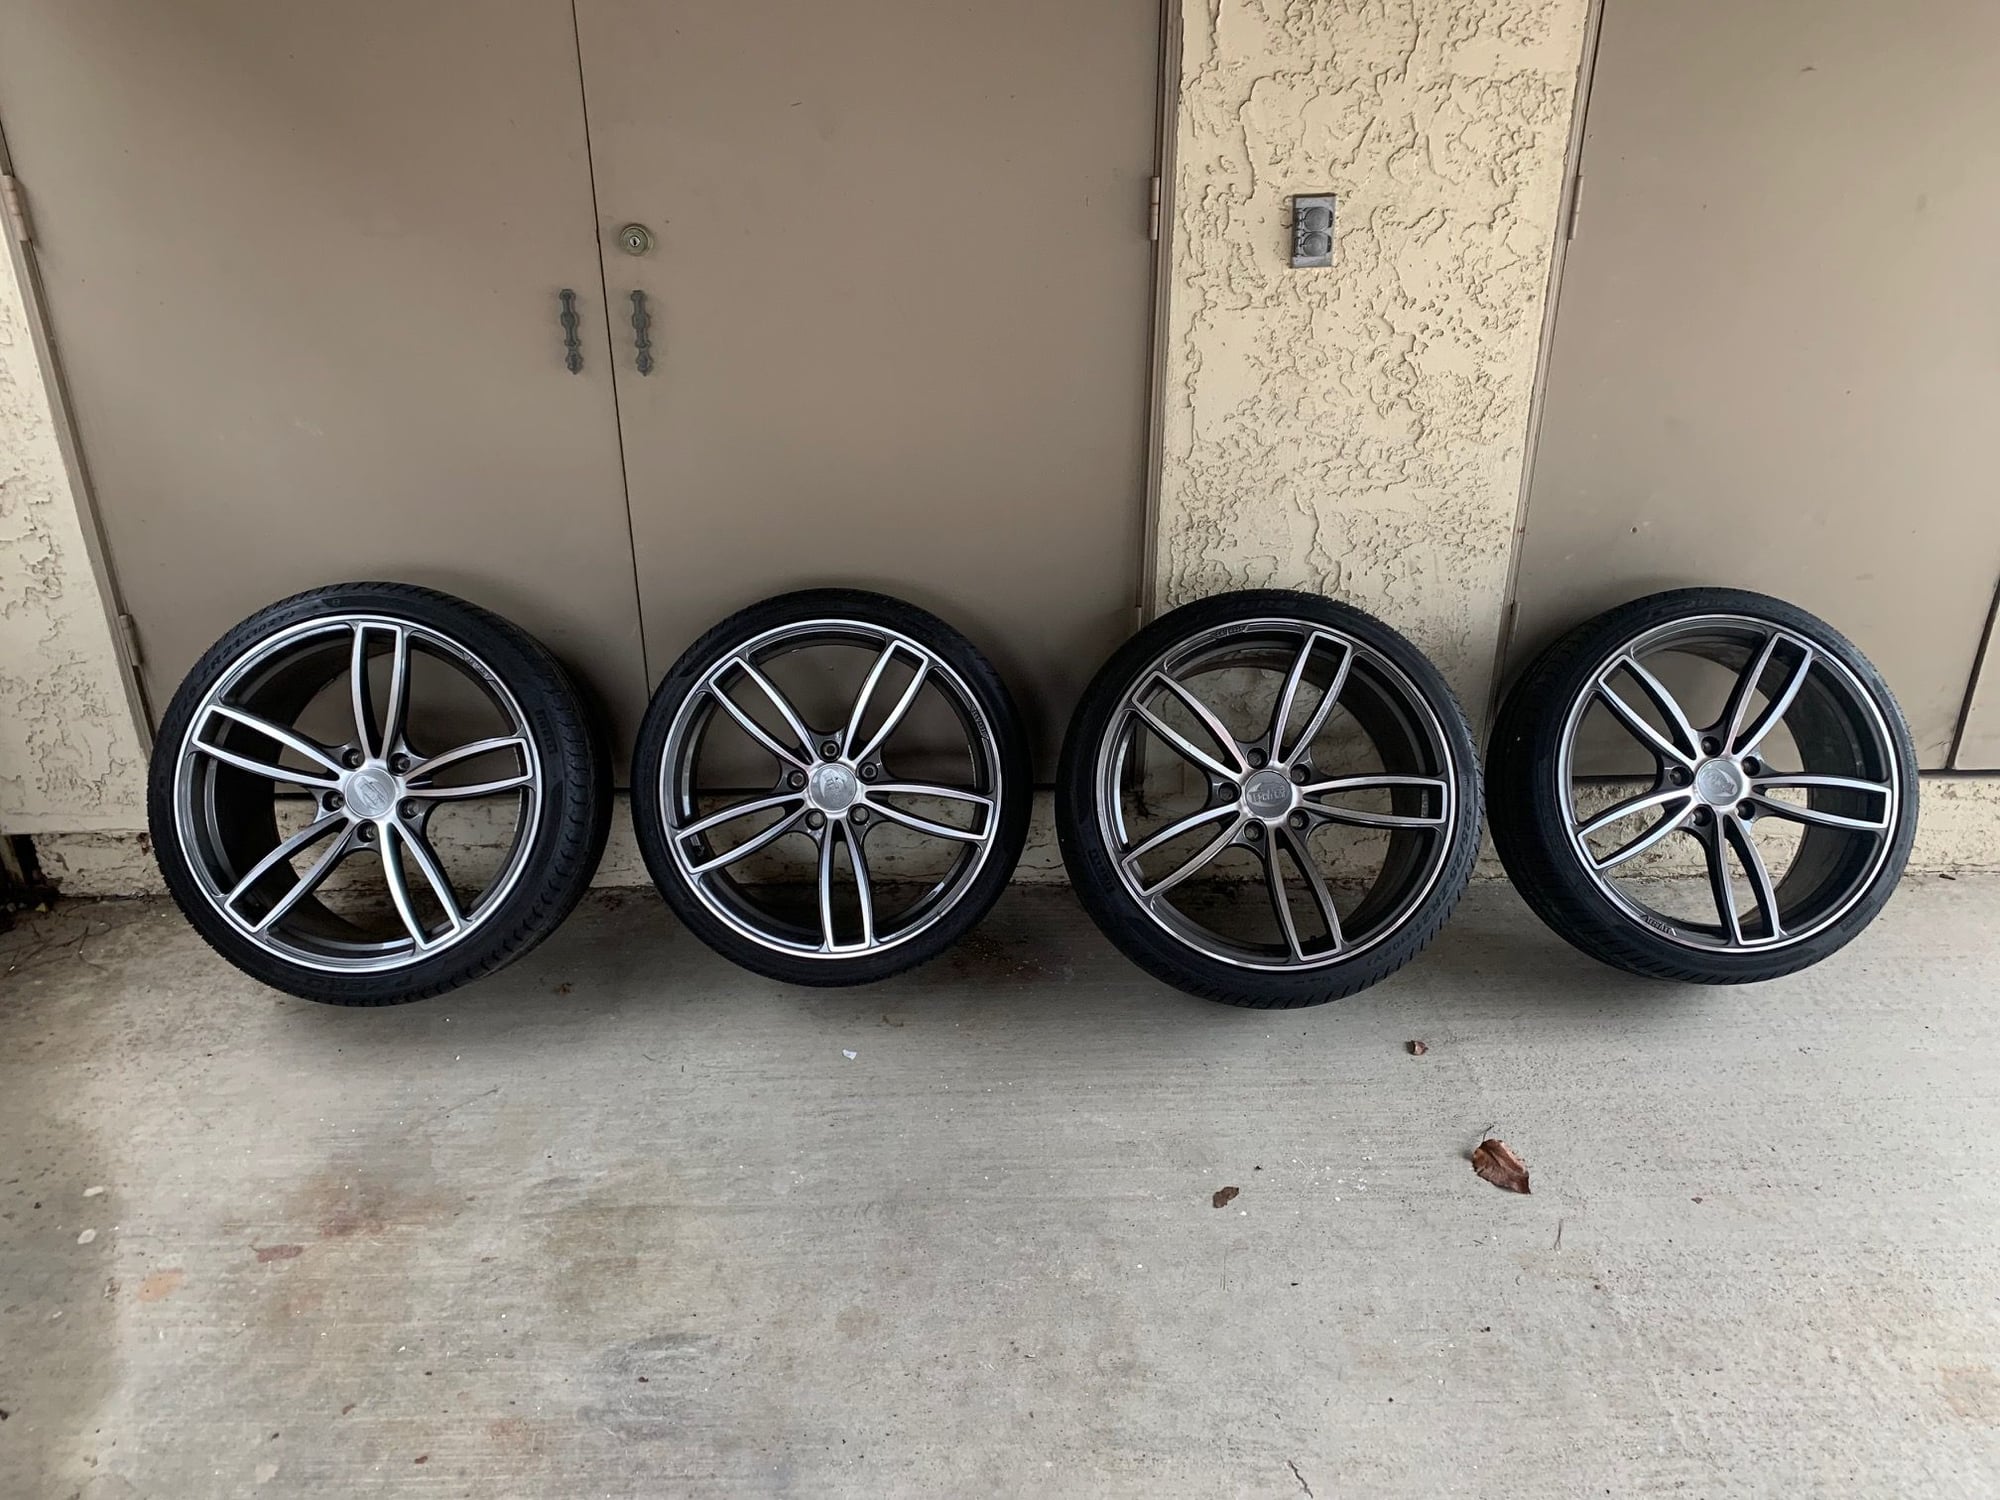 Wheels and Tires/Axles - 21 Inch Techart Formula IV with P Zero Tires - Used - 2010 to 2019 Porsche 911 - San Diego, CA 92124, United States